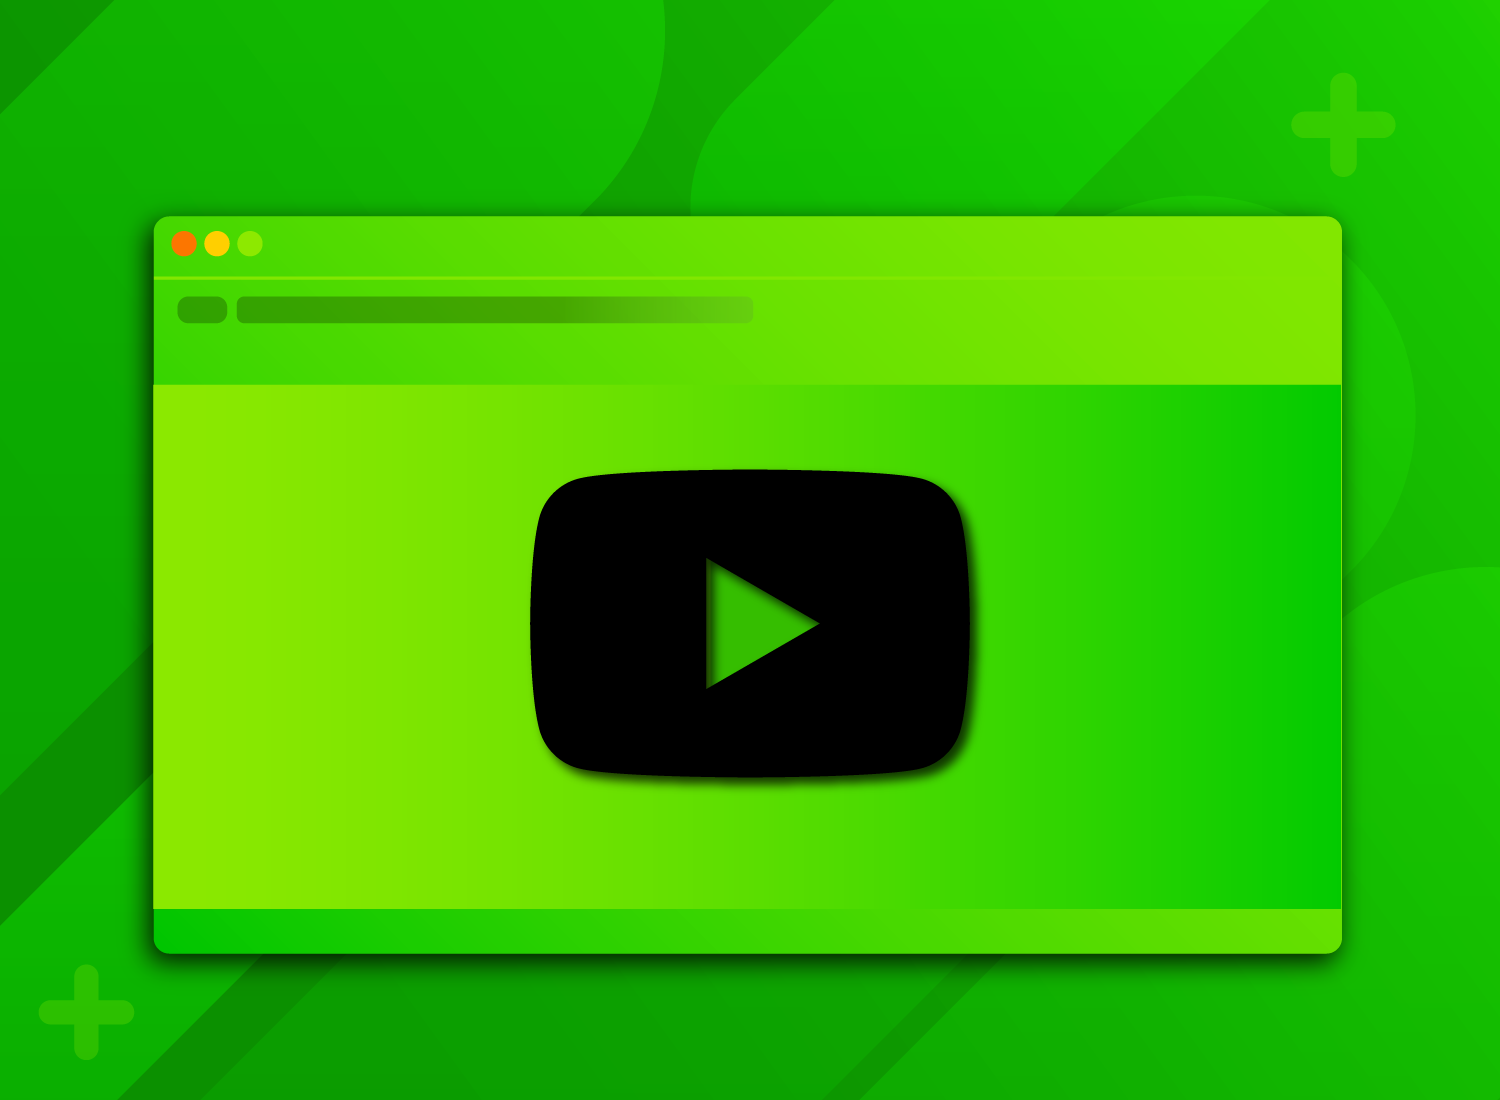 Stylized image of a web browser window with a large YouTube play button icon centered on a vibrant green background, suggesting a tutorial on "how to make a YouTube intro."